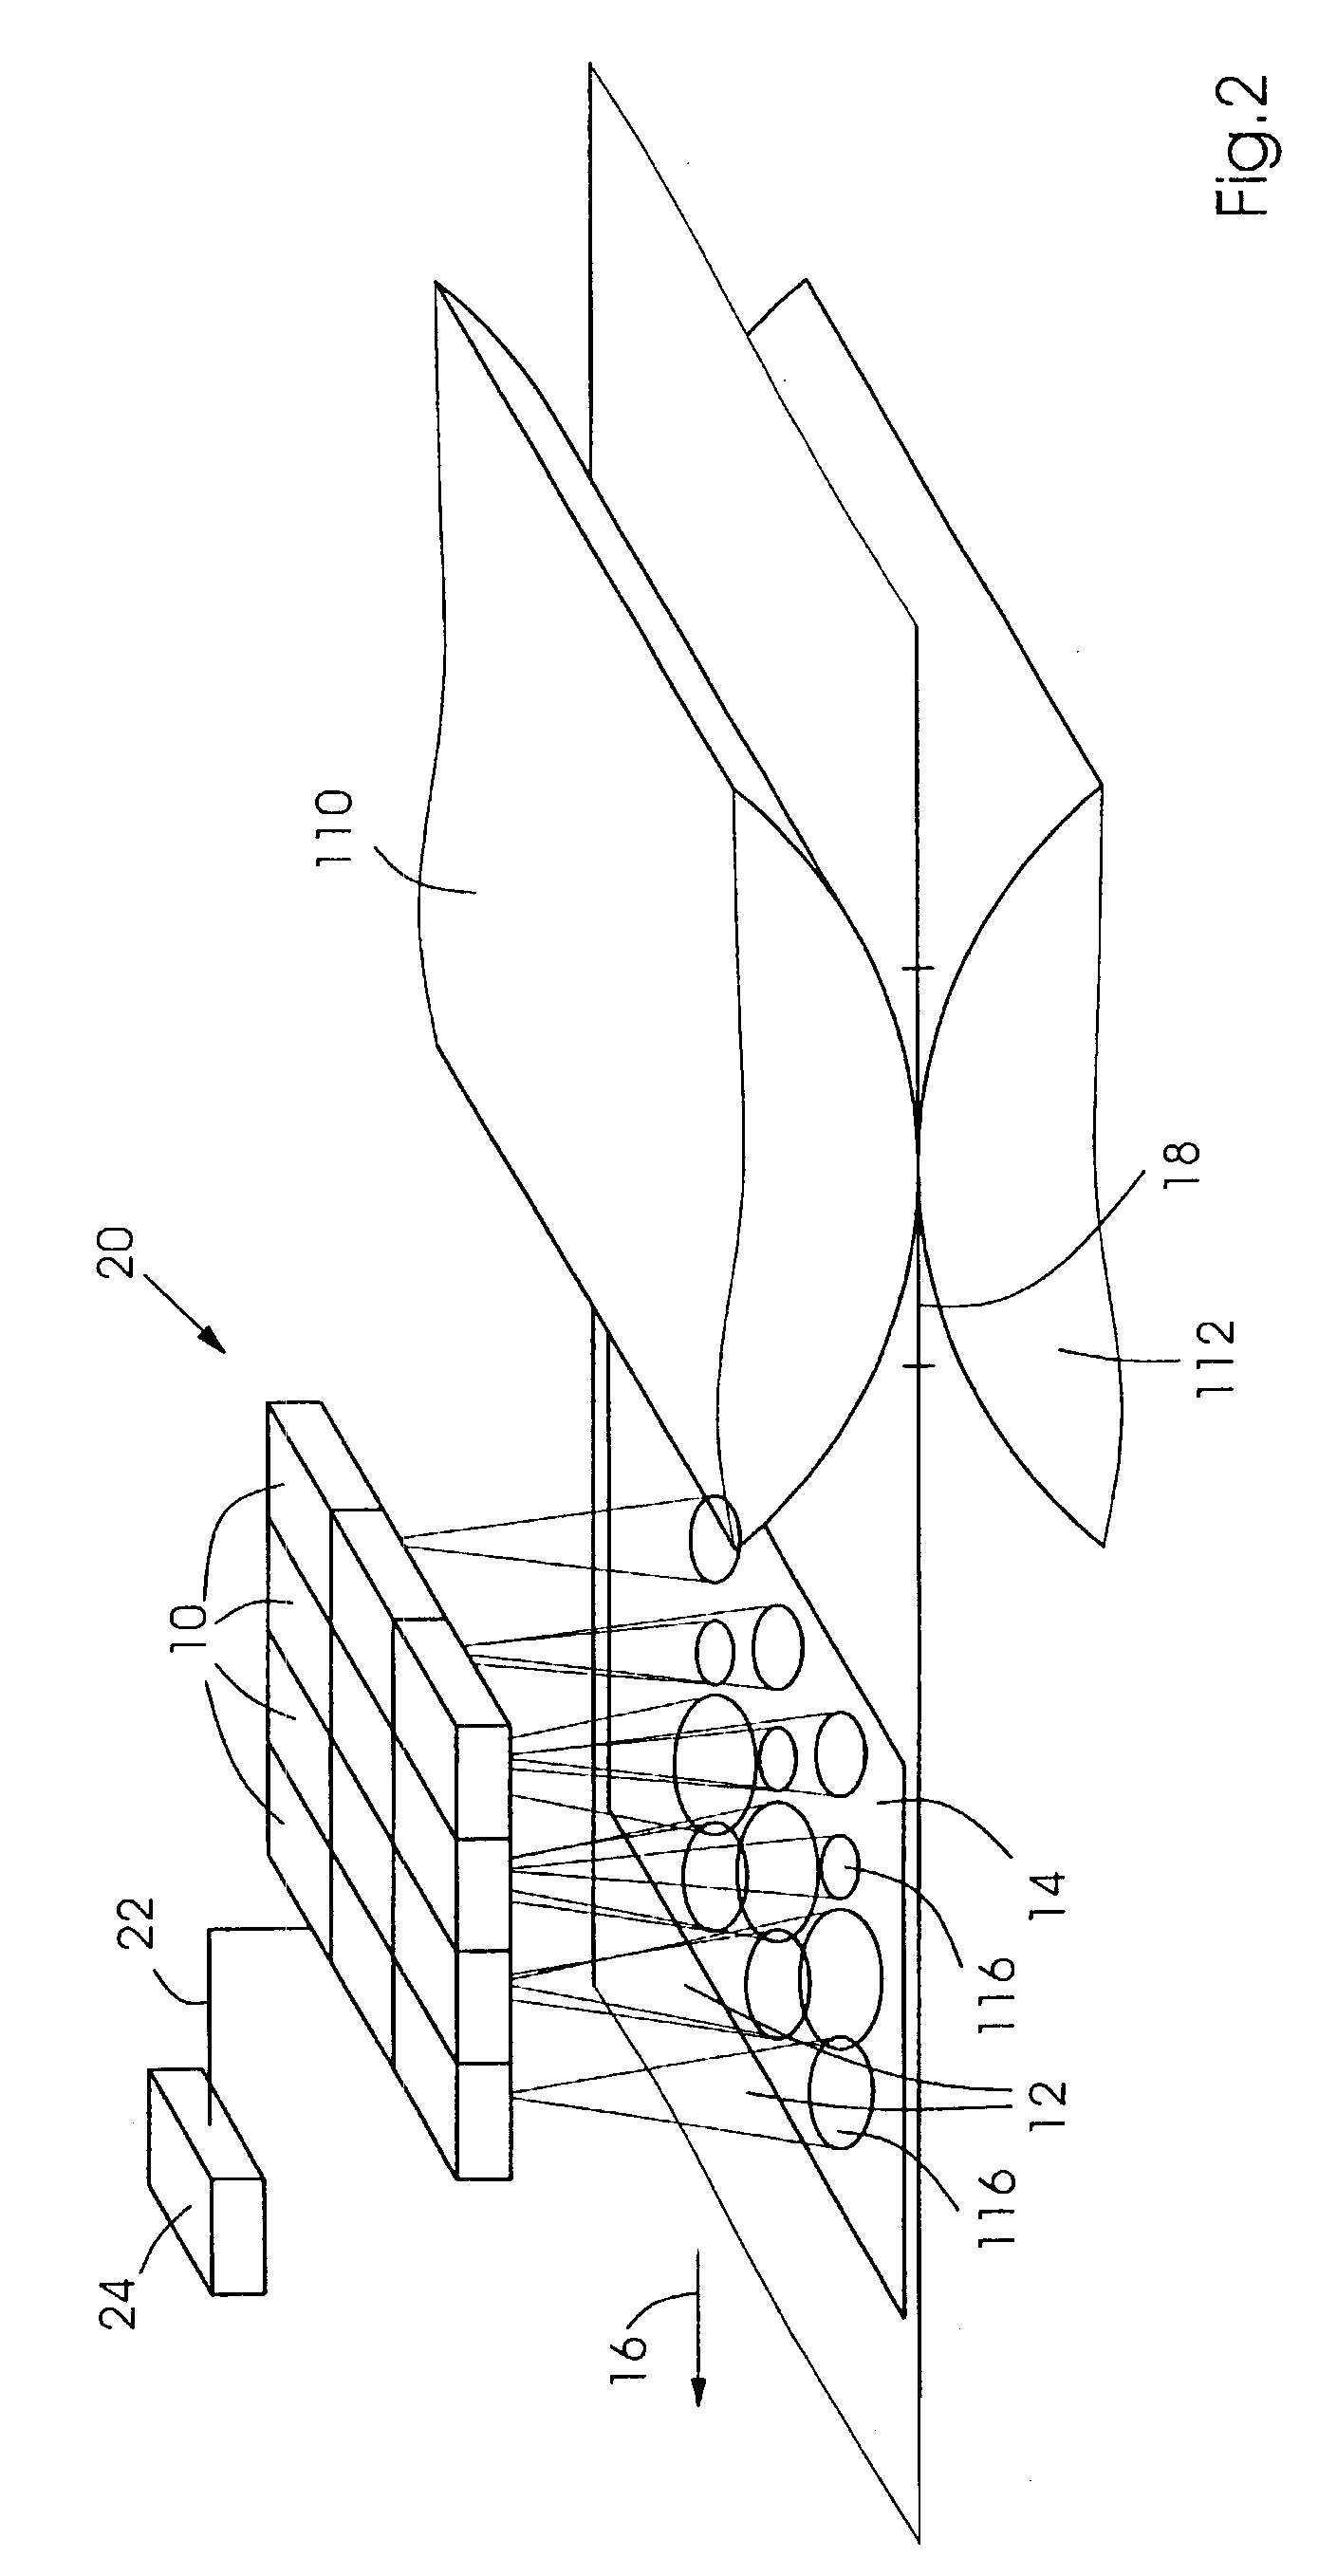 Device and method for supplying radiant energy onto a printing substrate in a planographic printing press